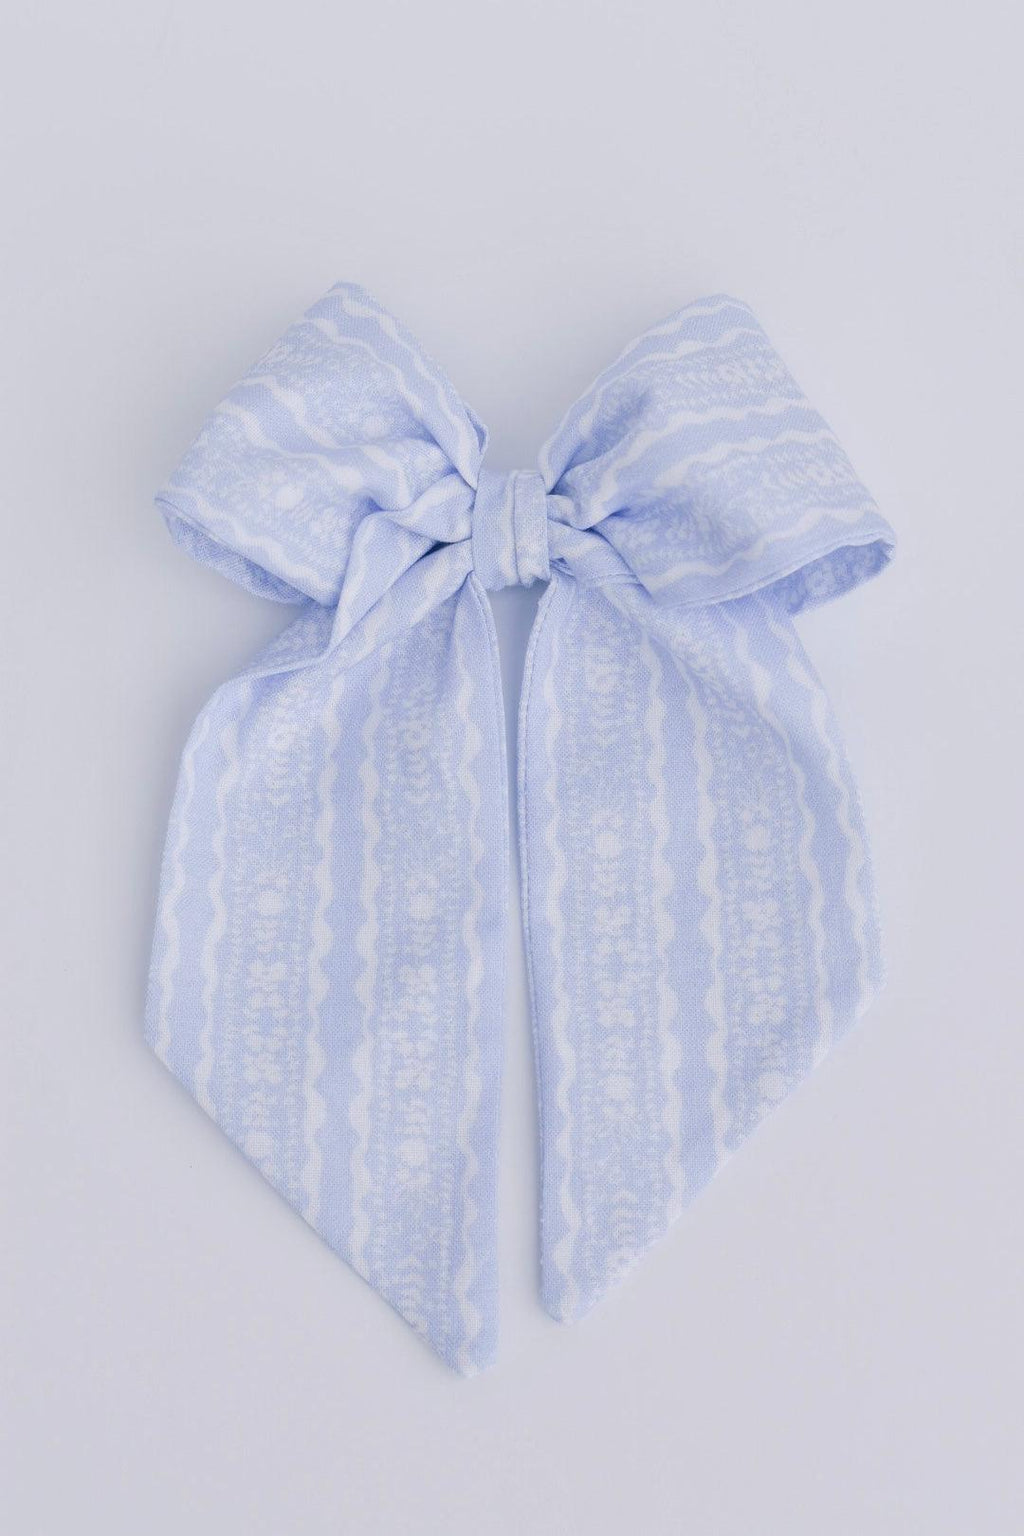 Vintage Sailor - Quadrille | Nashville Bow Co. - Classic Hair Bows, Bow Ties, Basket Bows, Pacifier Clips, Wreath Sashes, Swaddle Bows. Classic Southern Charm.